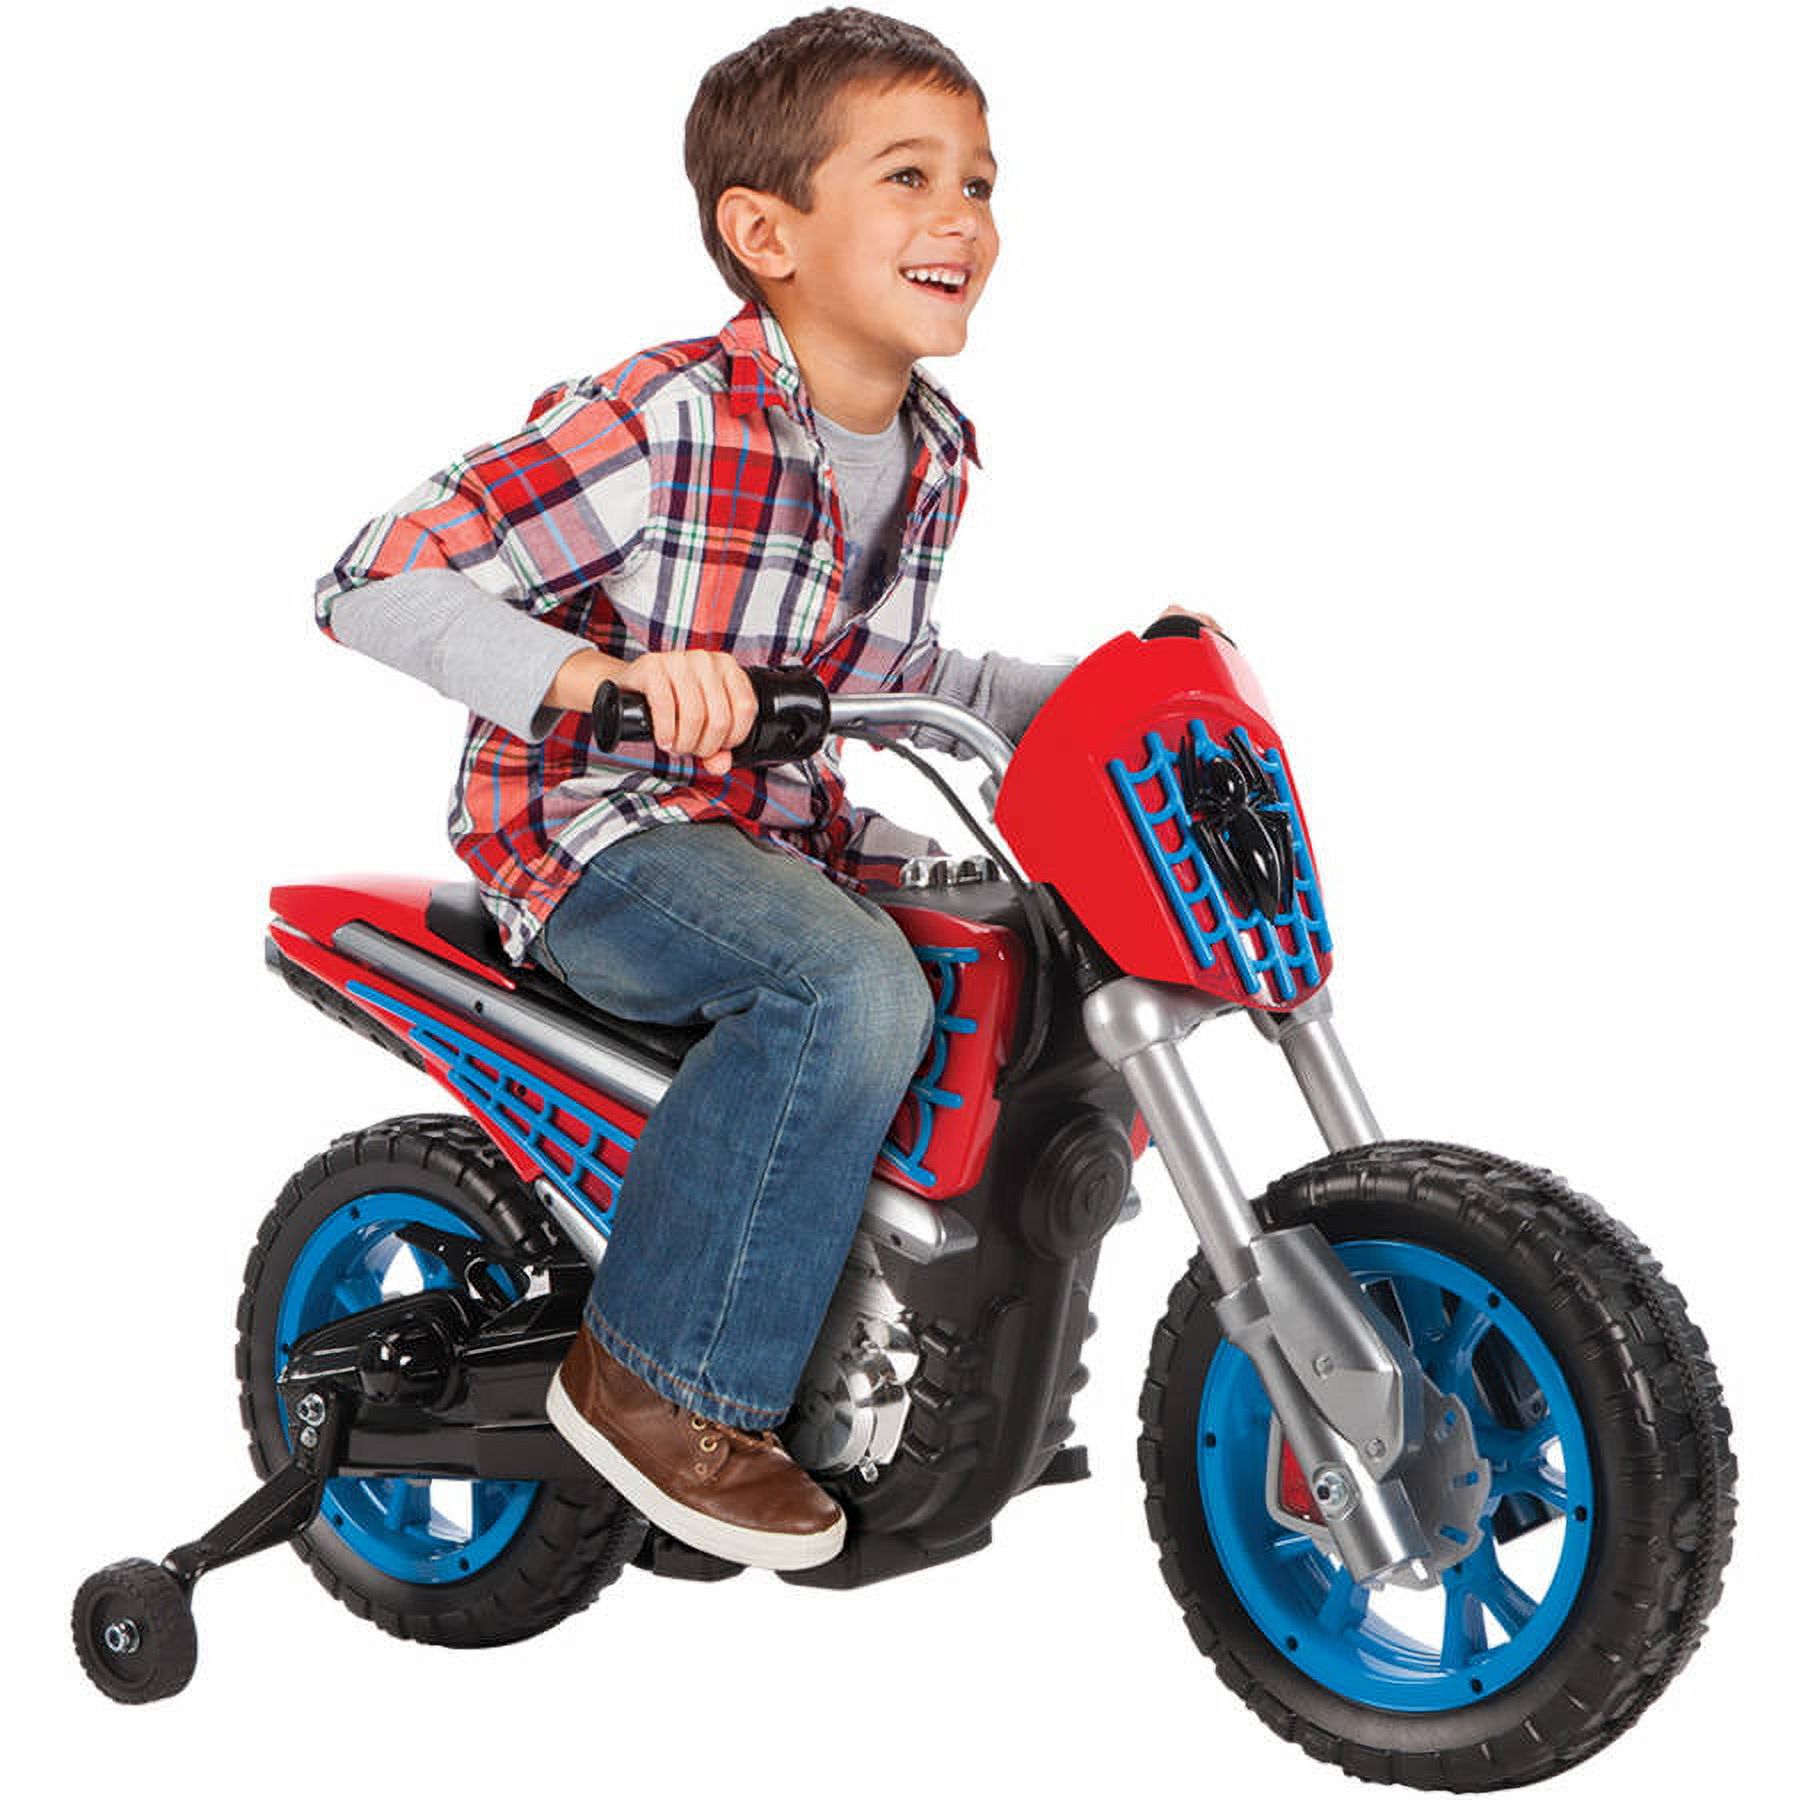 Marvel Spider-Man 6-Volt Electric Battery-Powered Ride On Toy by Huffy - image 1 of 4